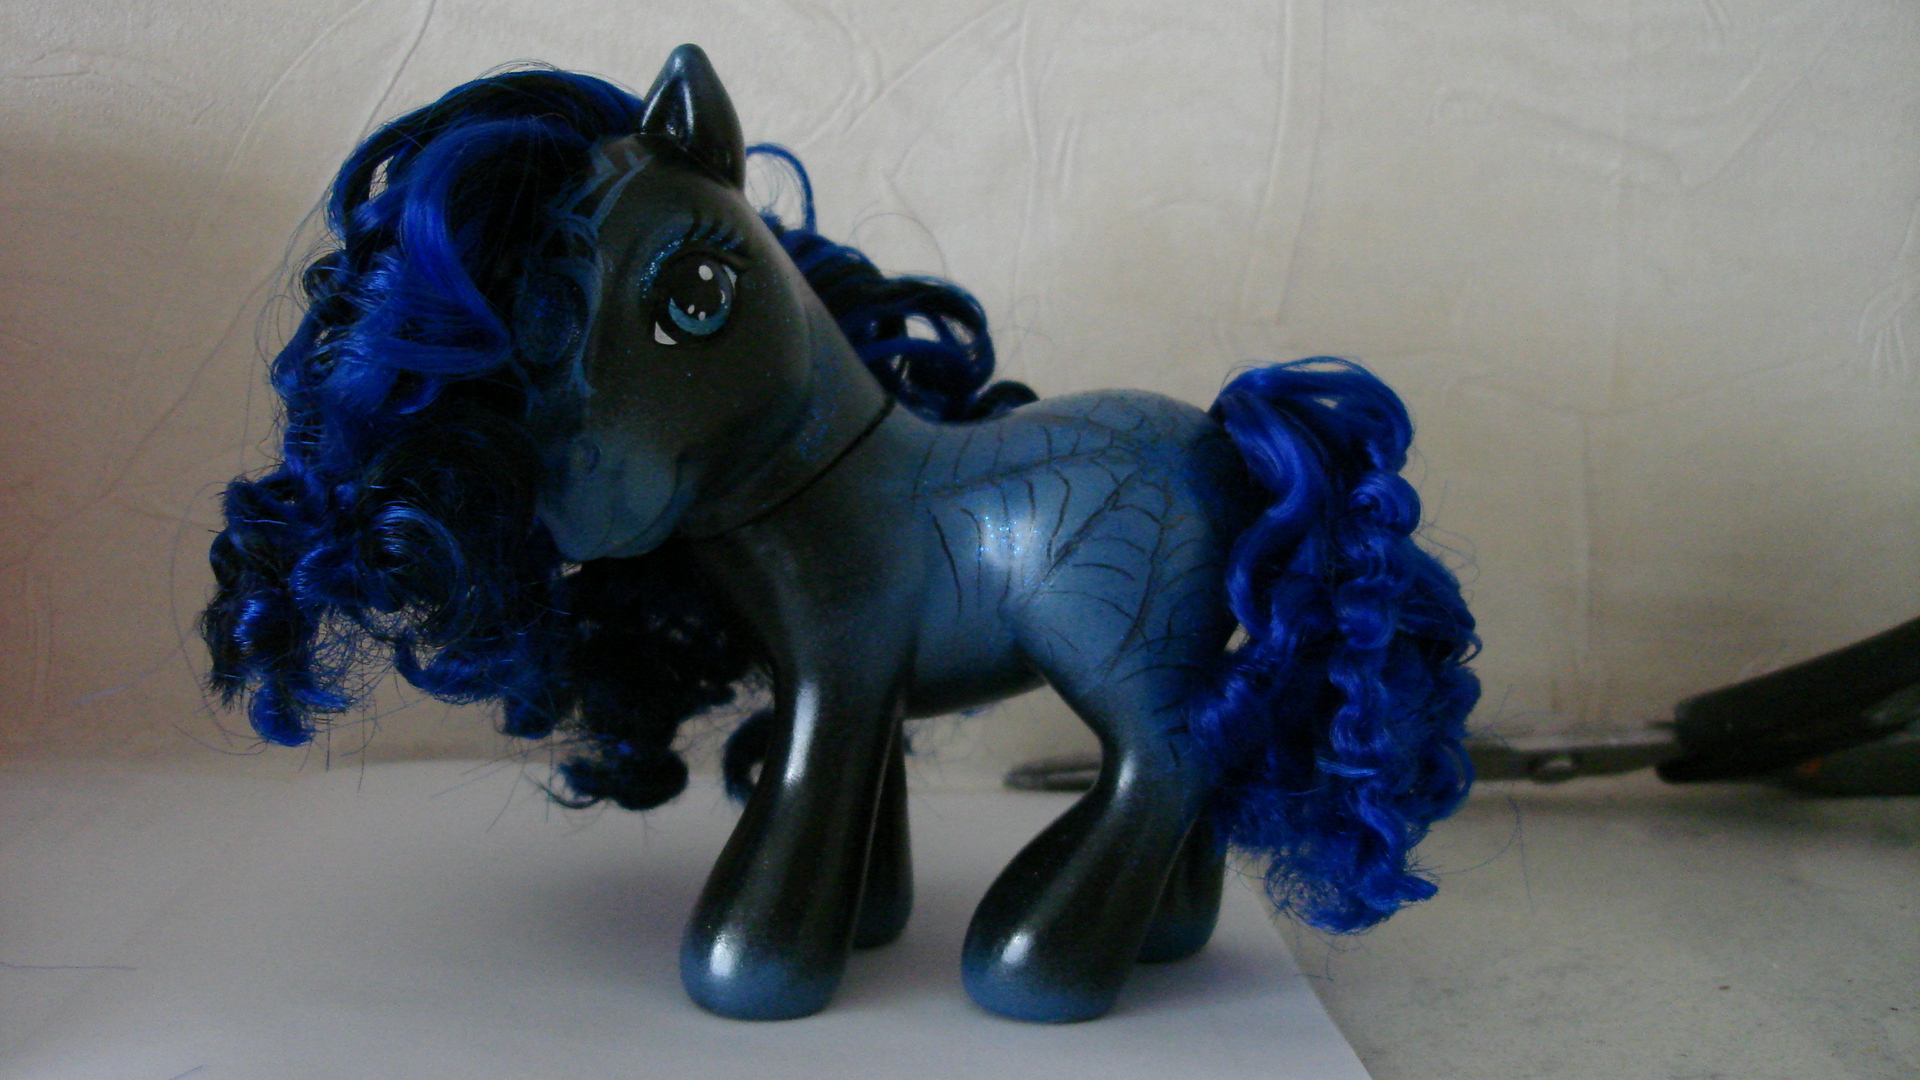 an image of a black pony with blue hair